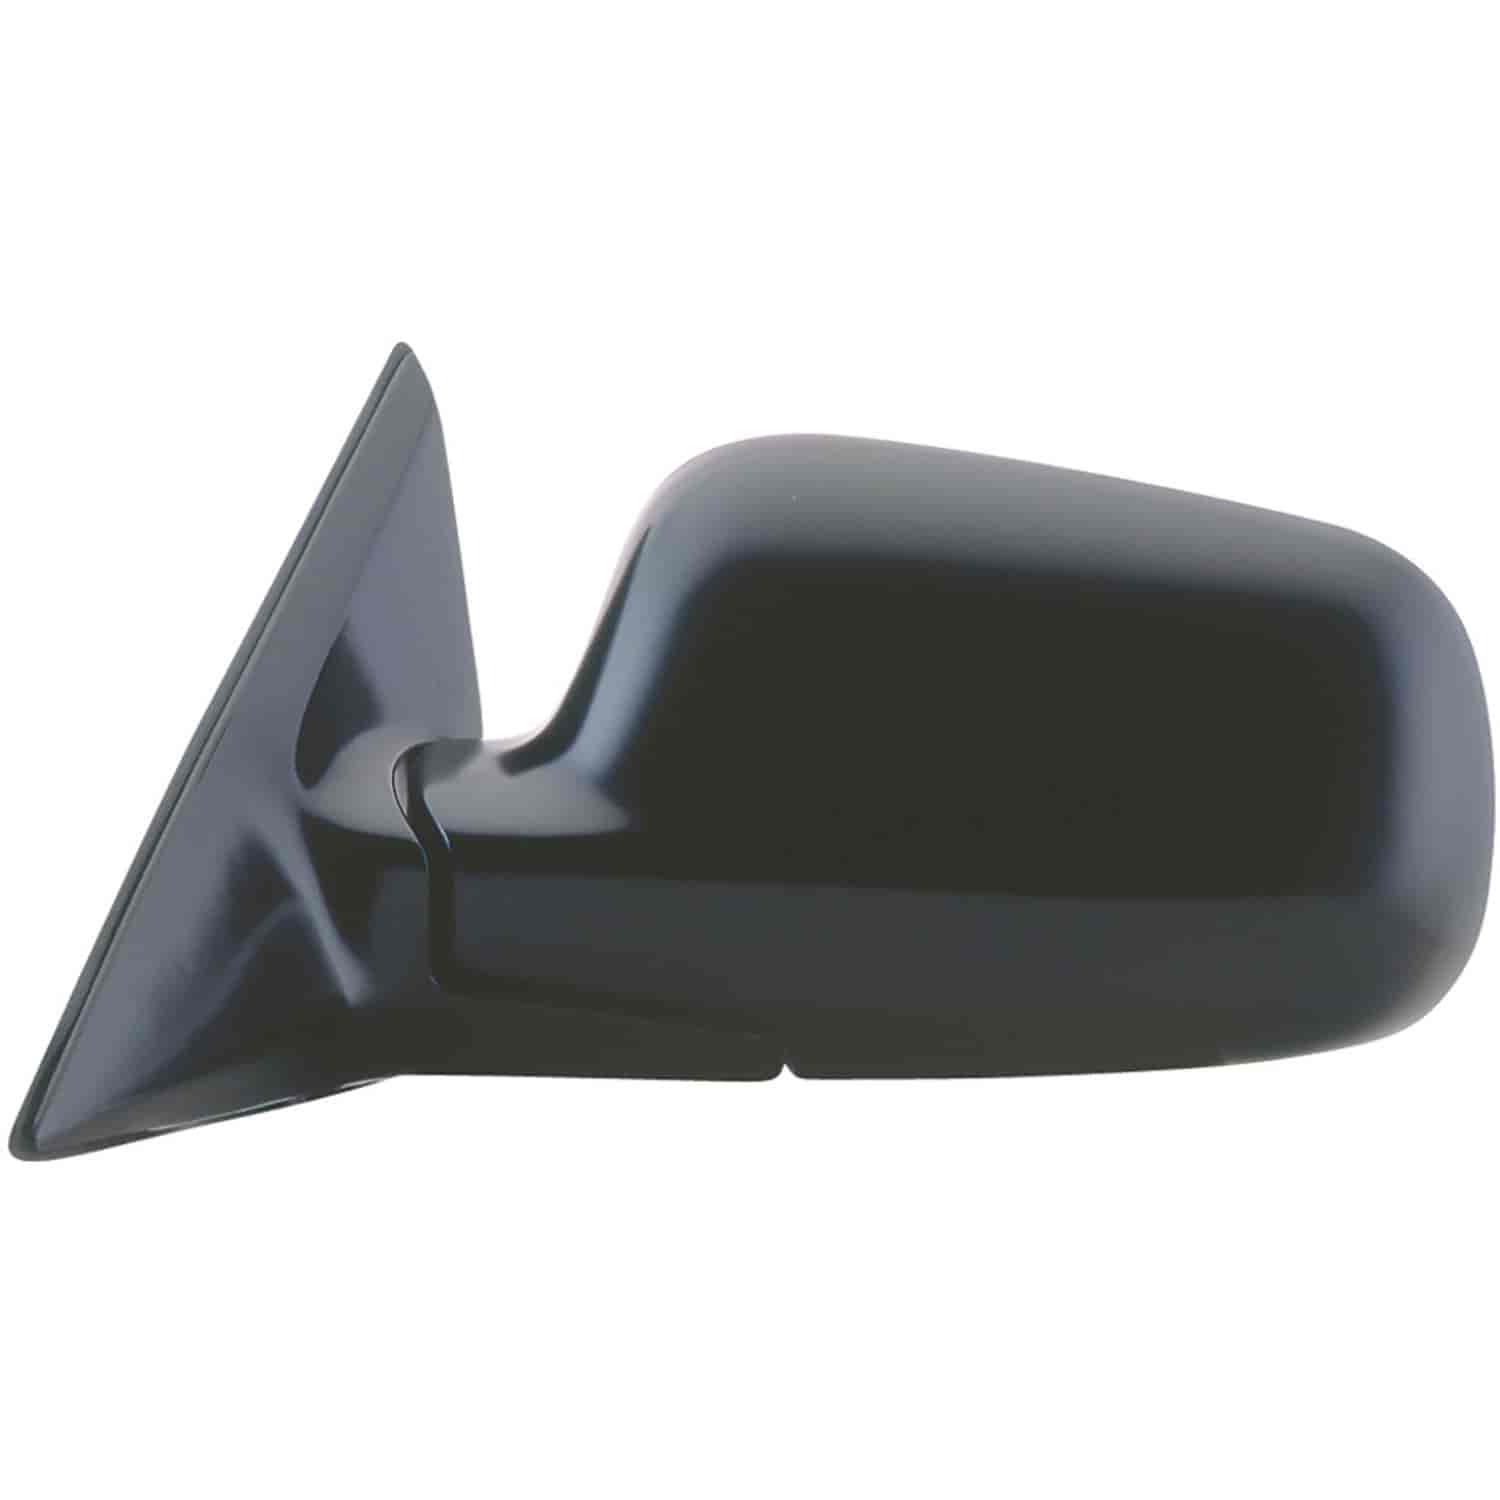 OEM Style Replacement mirror for 94-97 Honda Accord Coupe driver side mirror tested to fit and funct